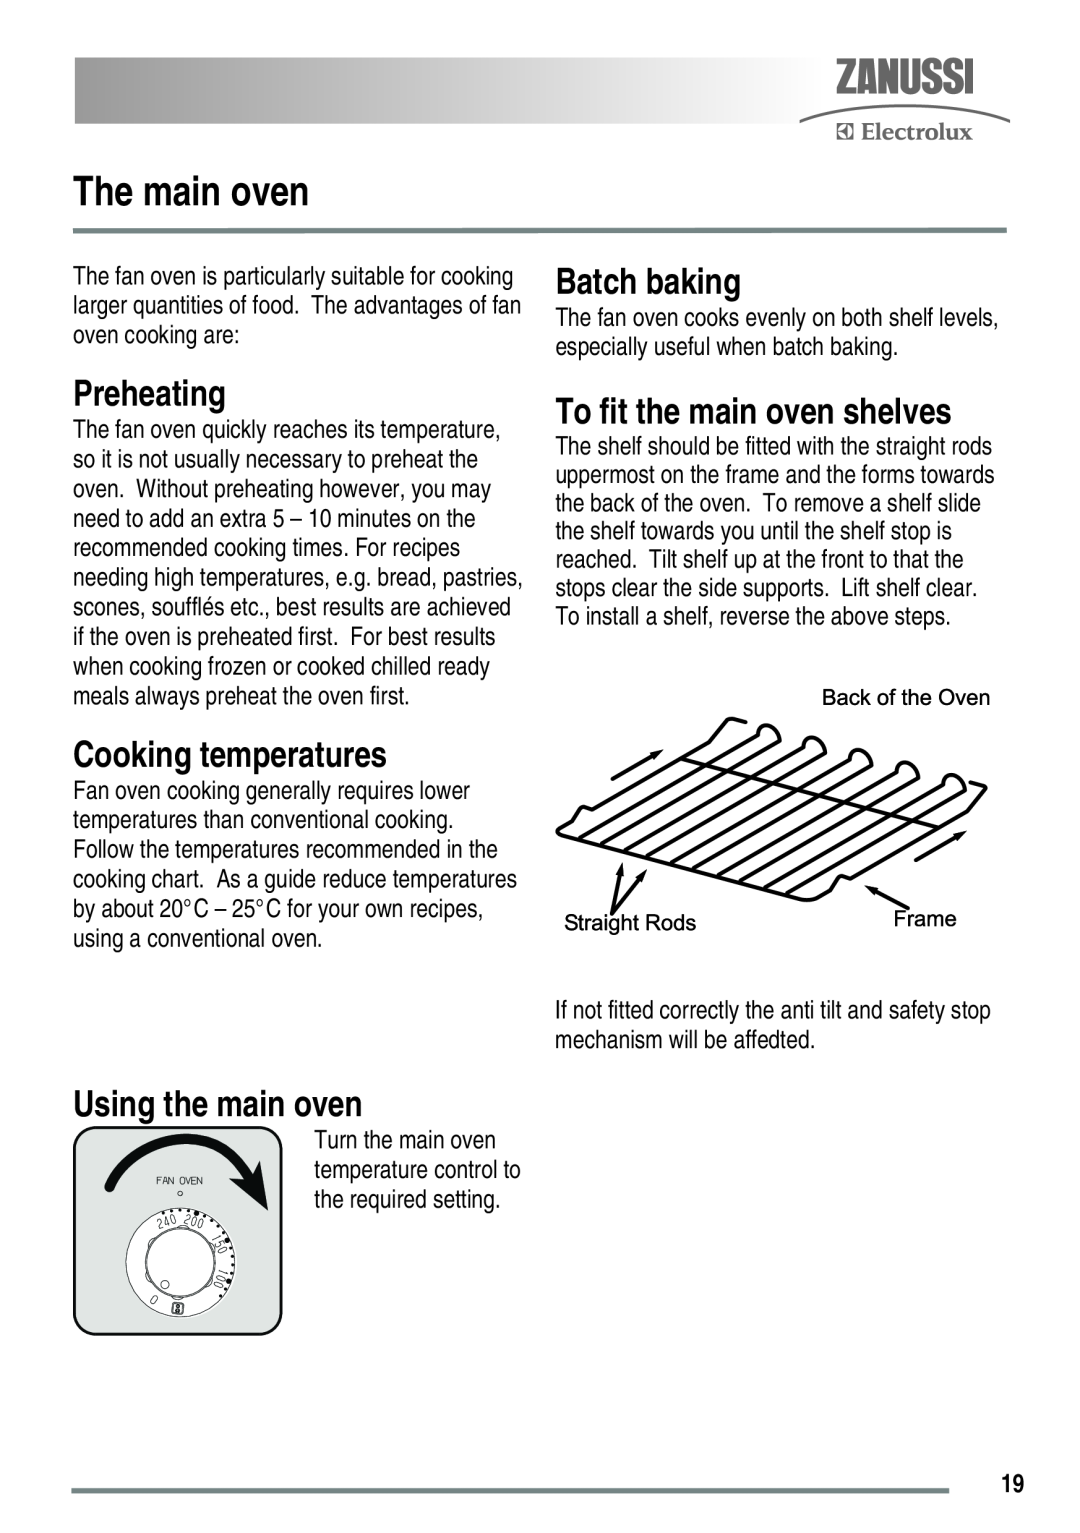 Zanussi ZKC5030 user manual The main oven, Batch baking, Preheating, To fit the main oven shelves, Cooking temperatures 